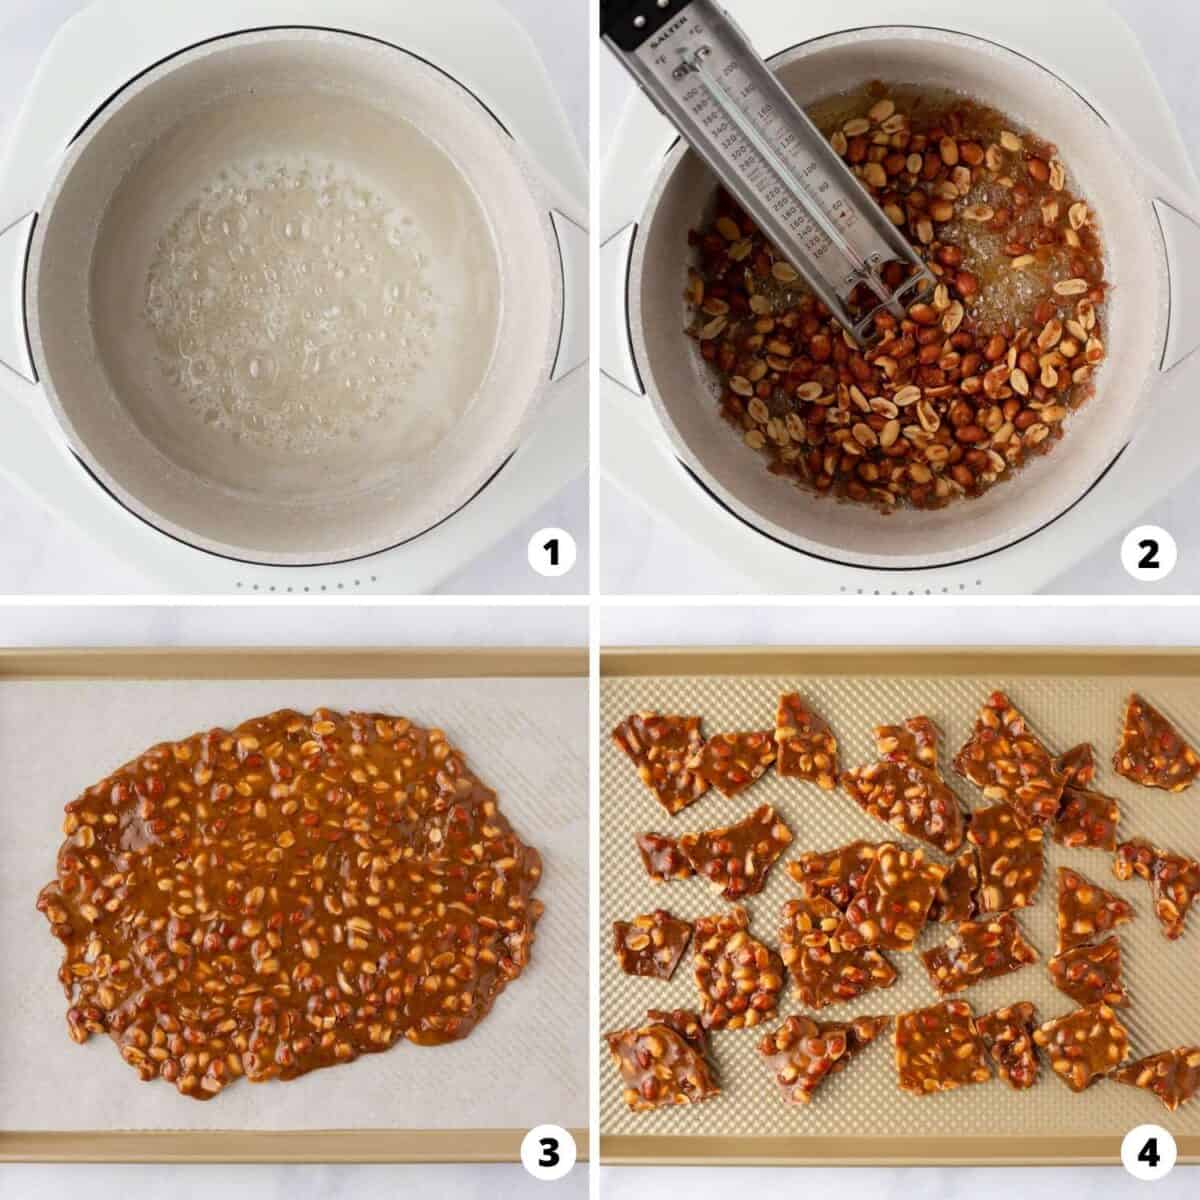 Showing how to make peanut brittle in a 4 step collage.